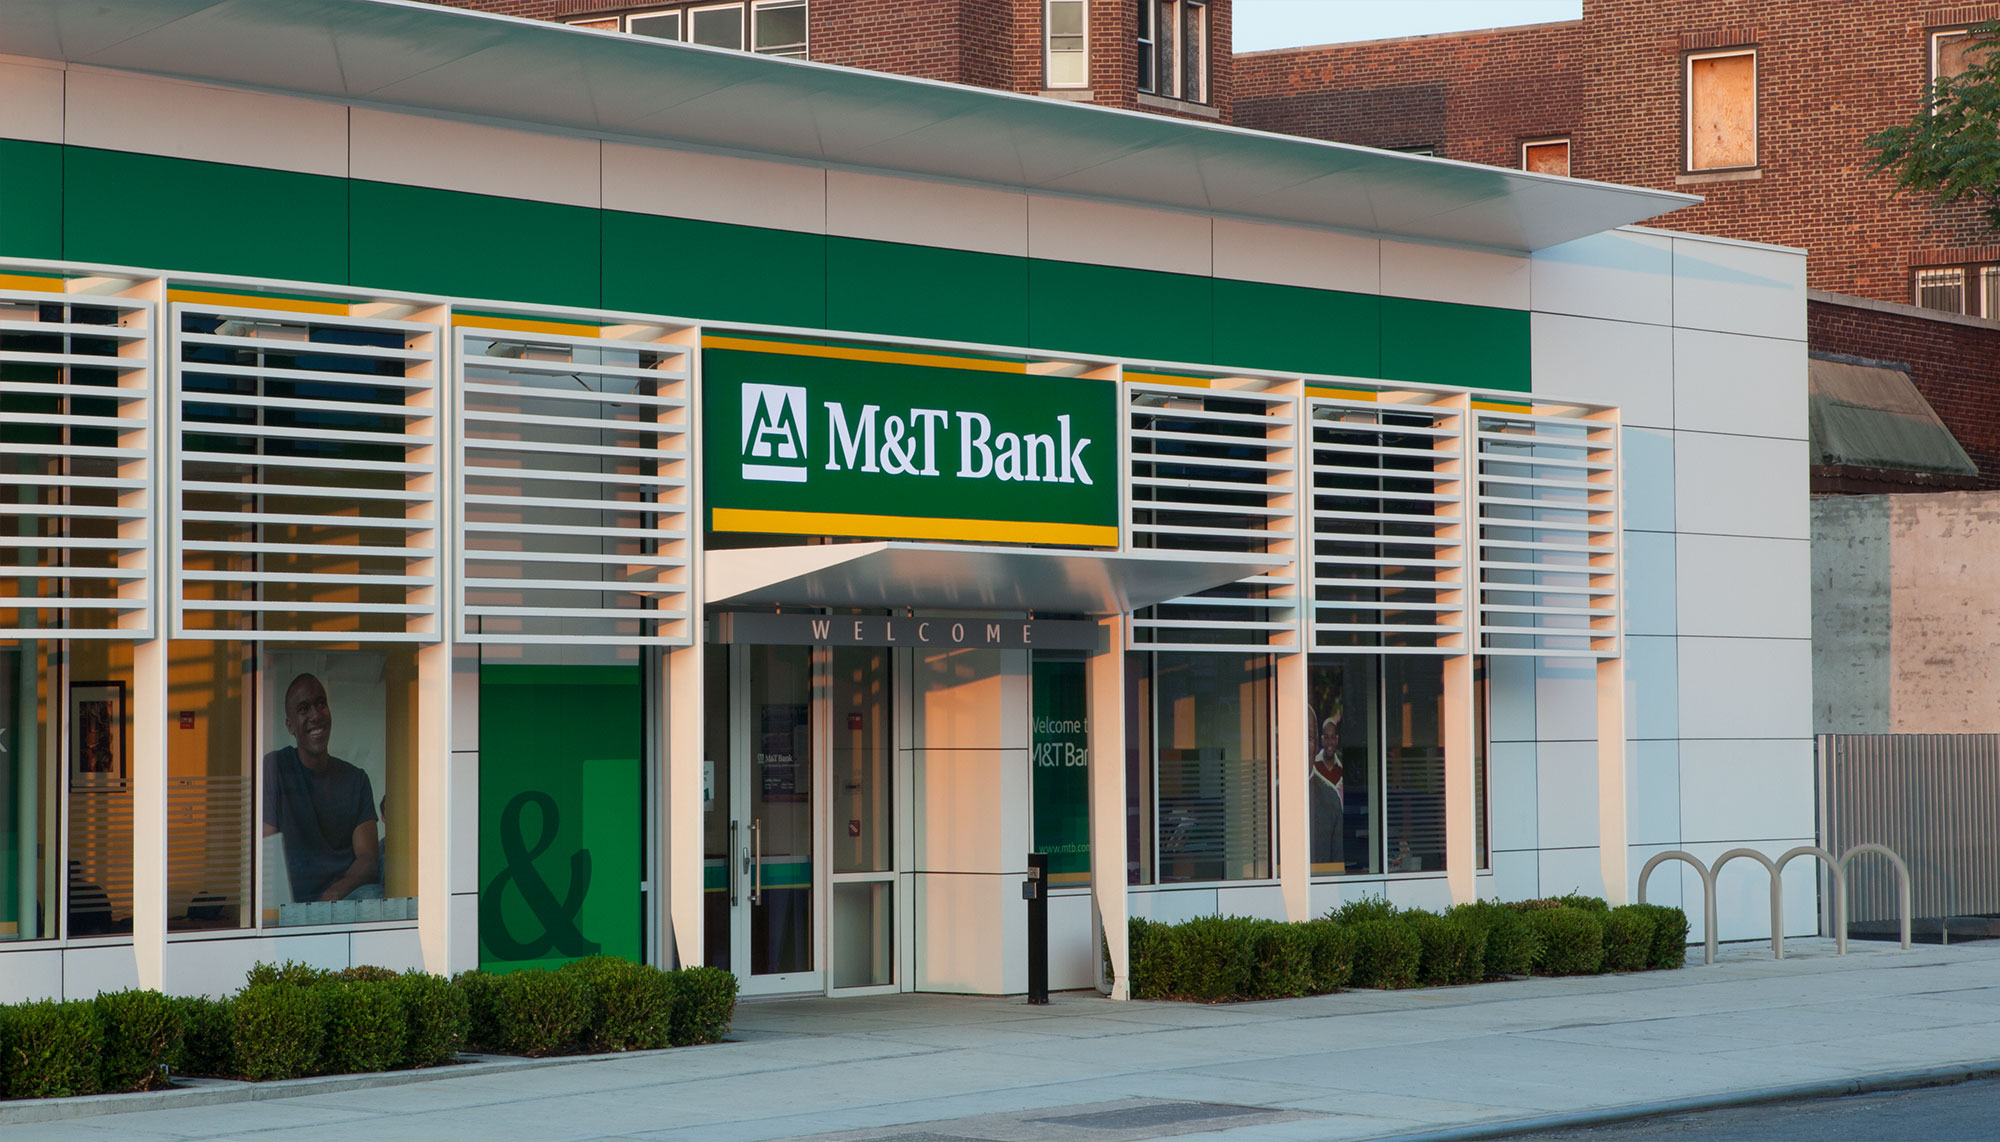 M&T Bank Central Branch